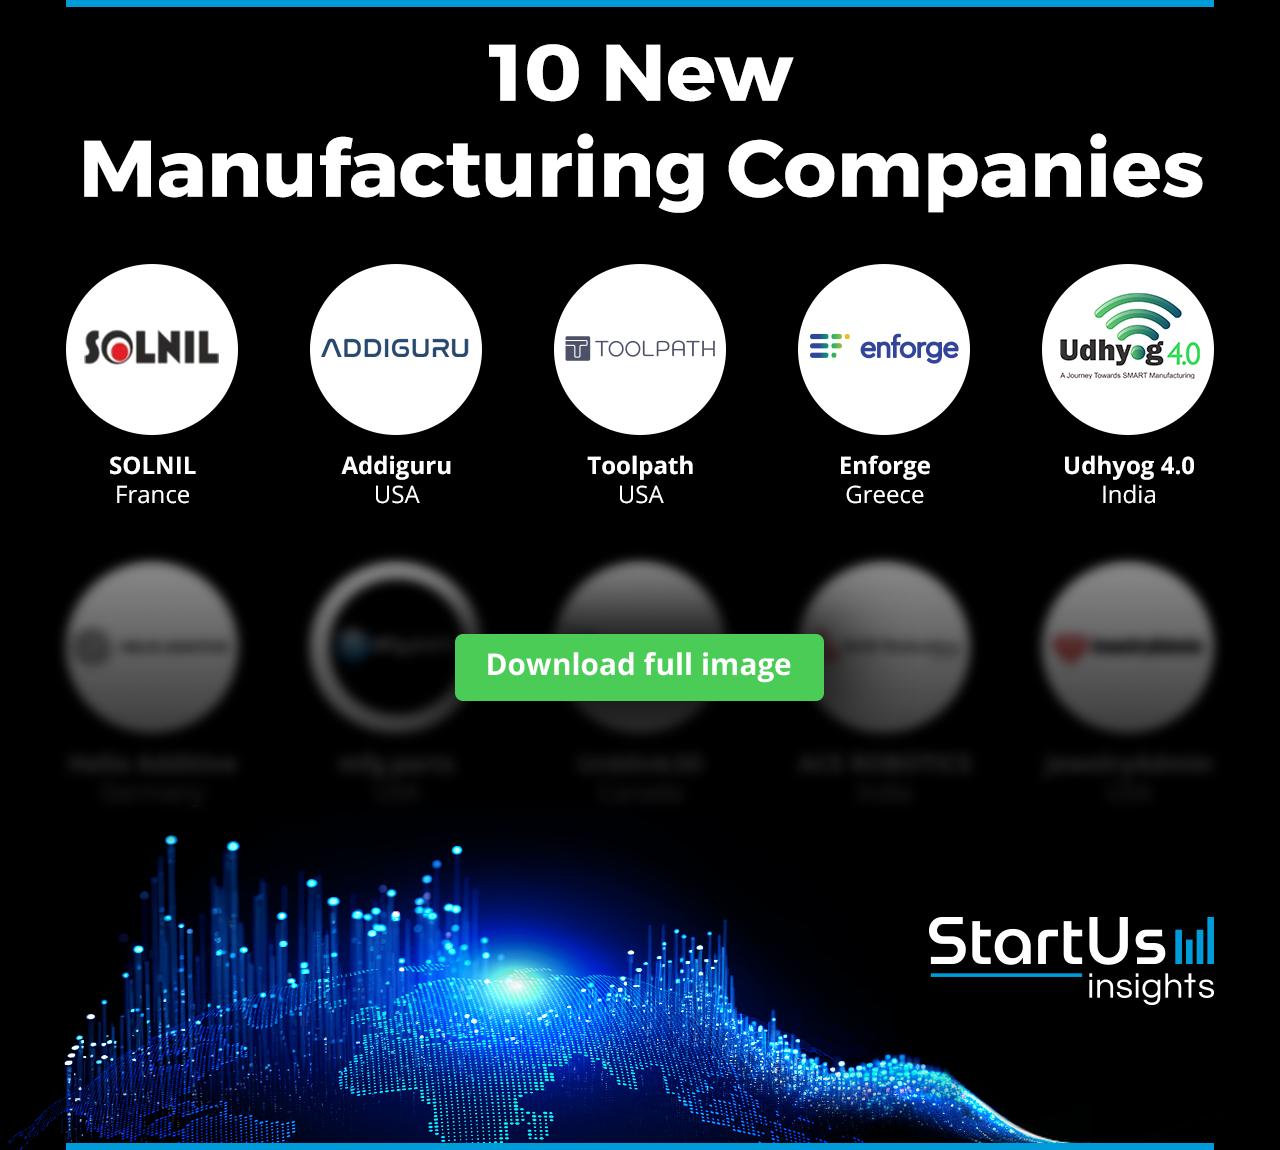 New-Manufacturing-Companies-Logos-Blurred-StartUs-Insights-noresize